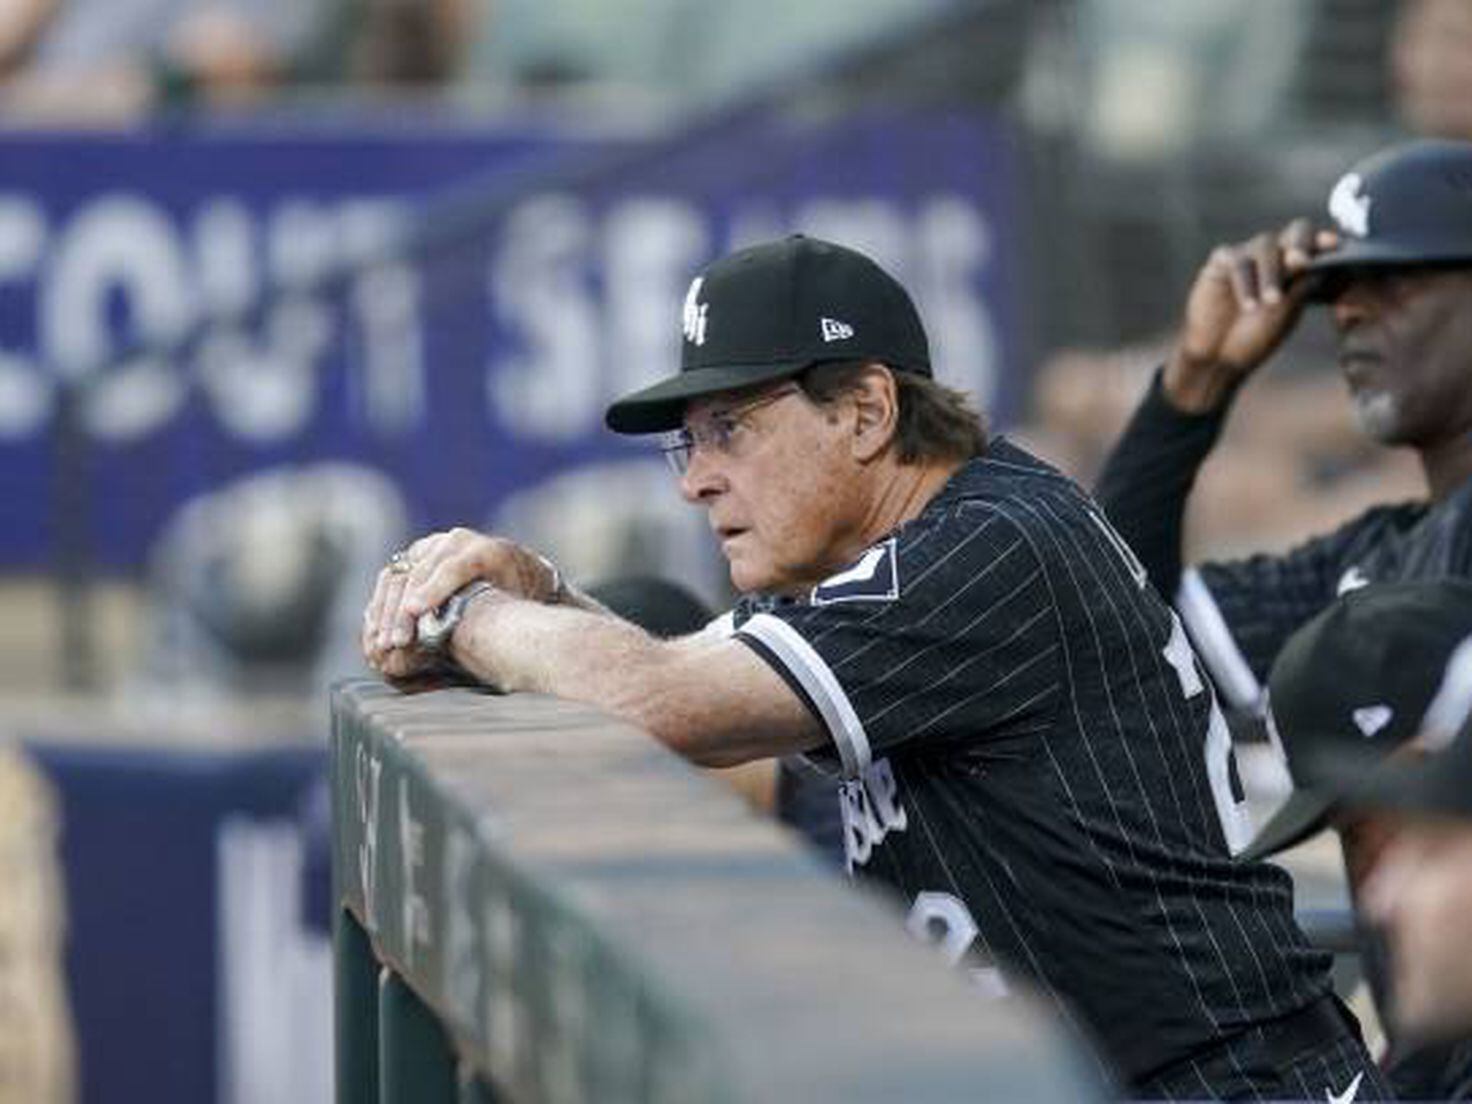 Tony La Russa stepping down as Chicago White Sox manager because